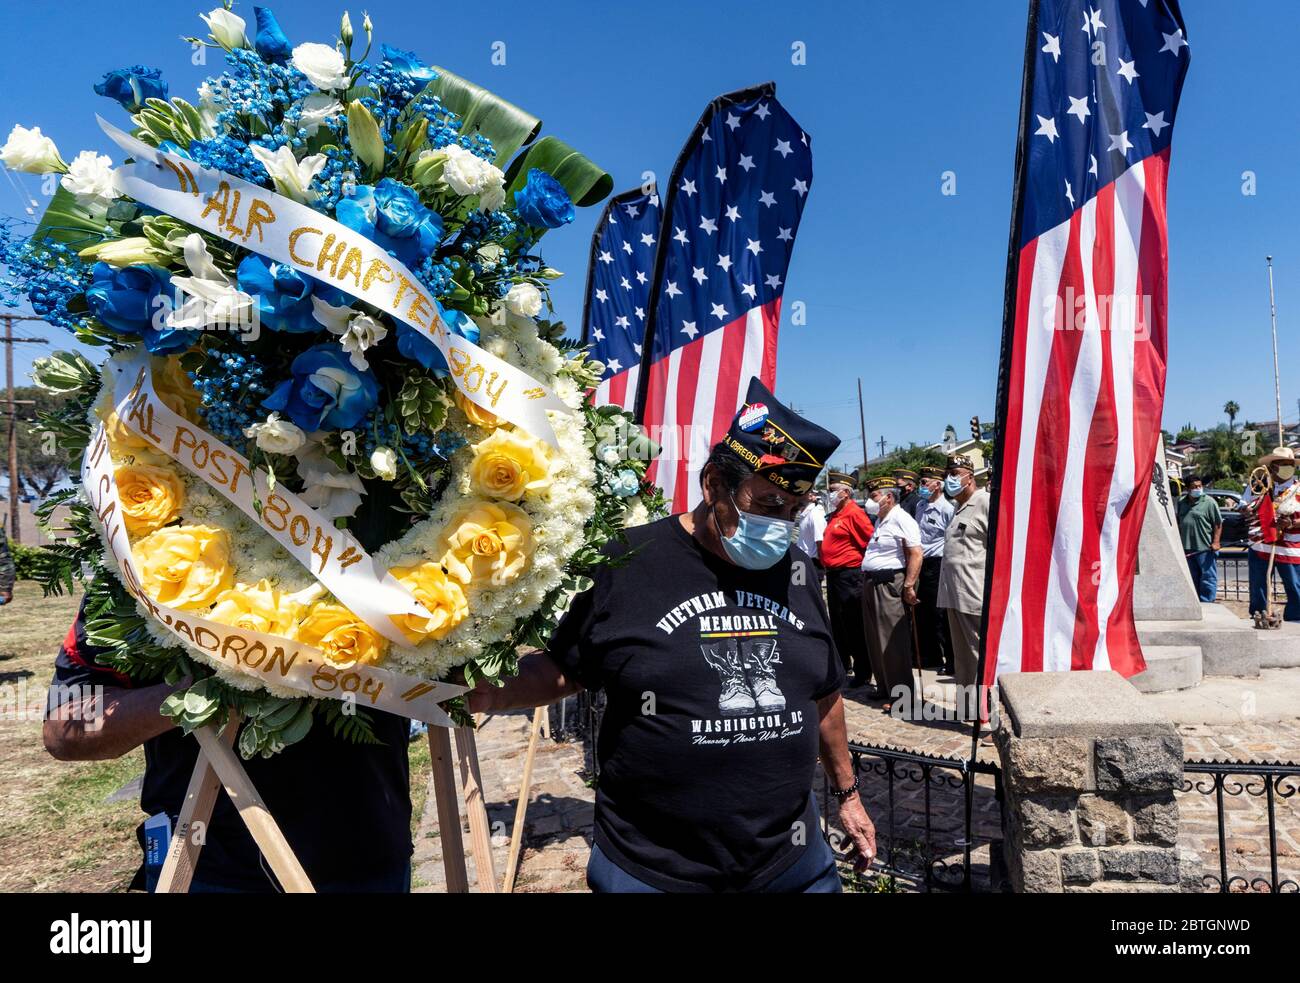 Veterans wearing face masks as a preventive measure against the spread of COVID 19 pandemic  participate in a Memorial Day Ceremony in Los Angeles.The event took place at the Los Cinco Puntos/Five Points Memorial that honours Mexican American soldiers who died in the World War II, the Korean War, and the Vietnam War. Stock Photo